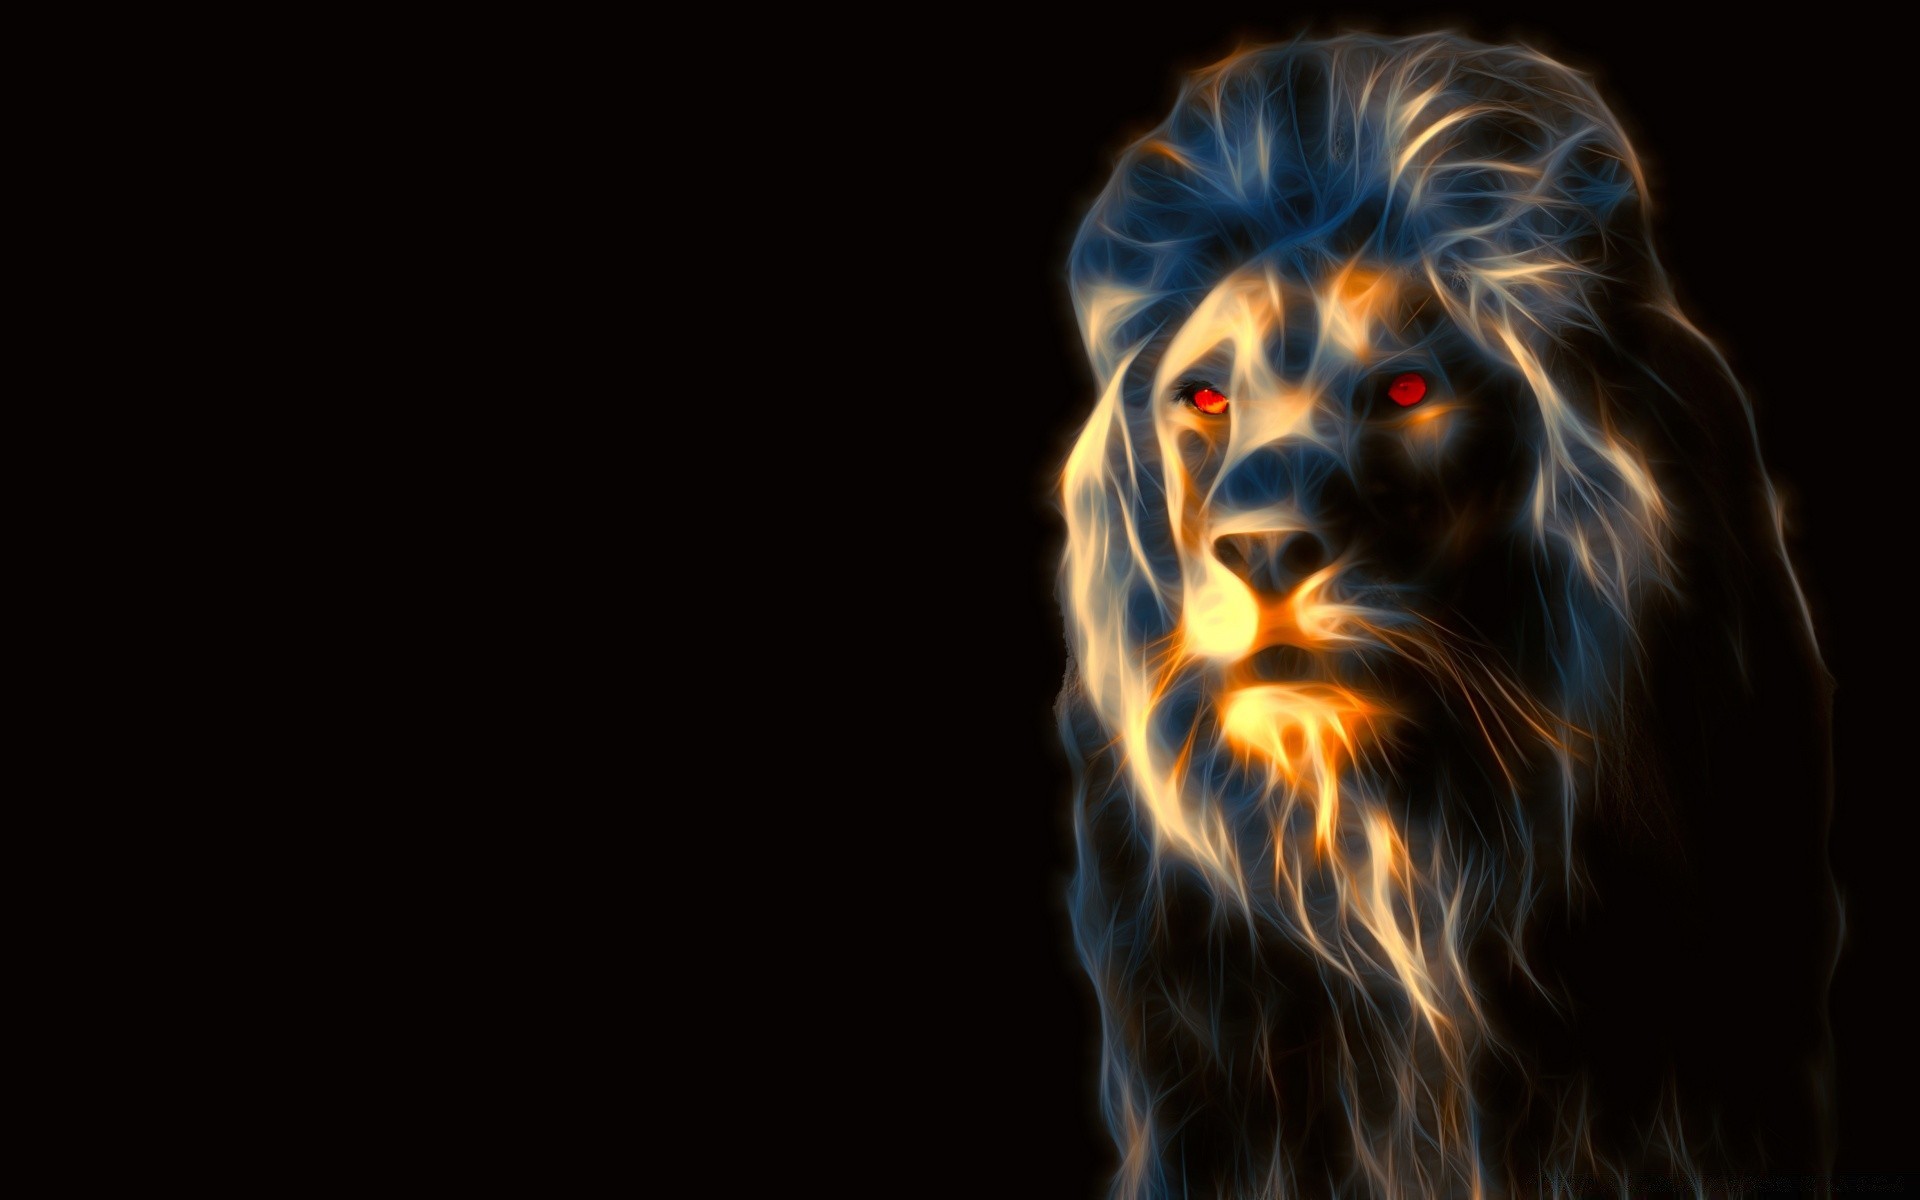 Portrait of an animated lion on a black background wallpaper